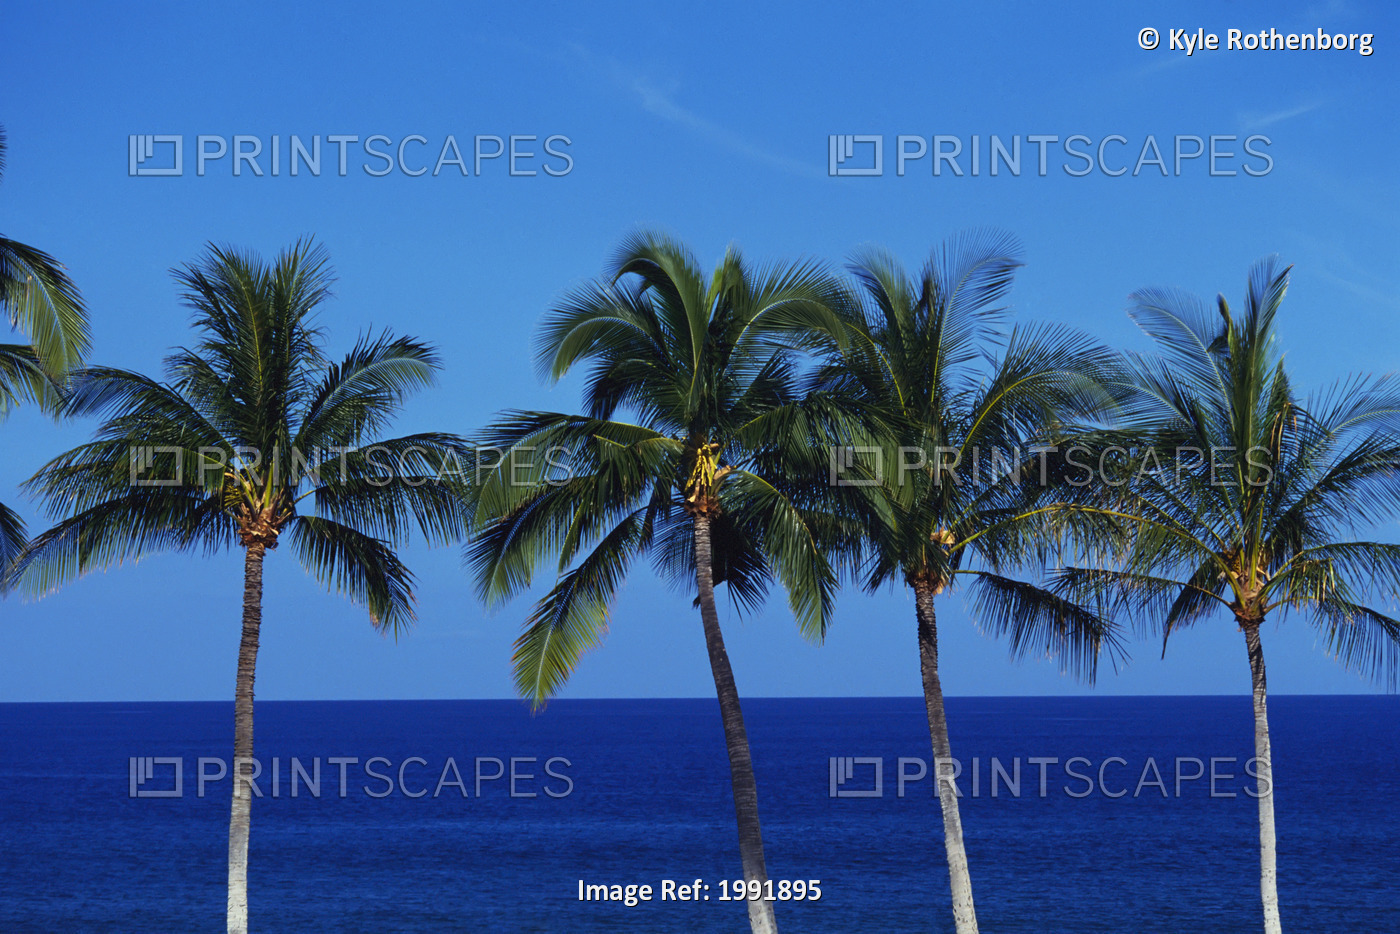 Hawaii, Palm Tree Tops Against Blue Sky And Ocean.